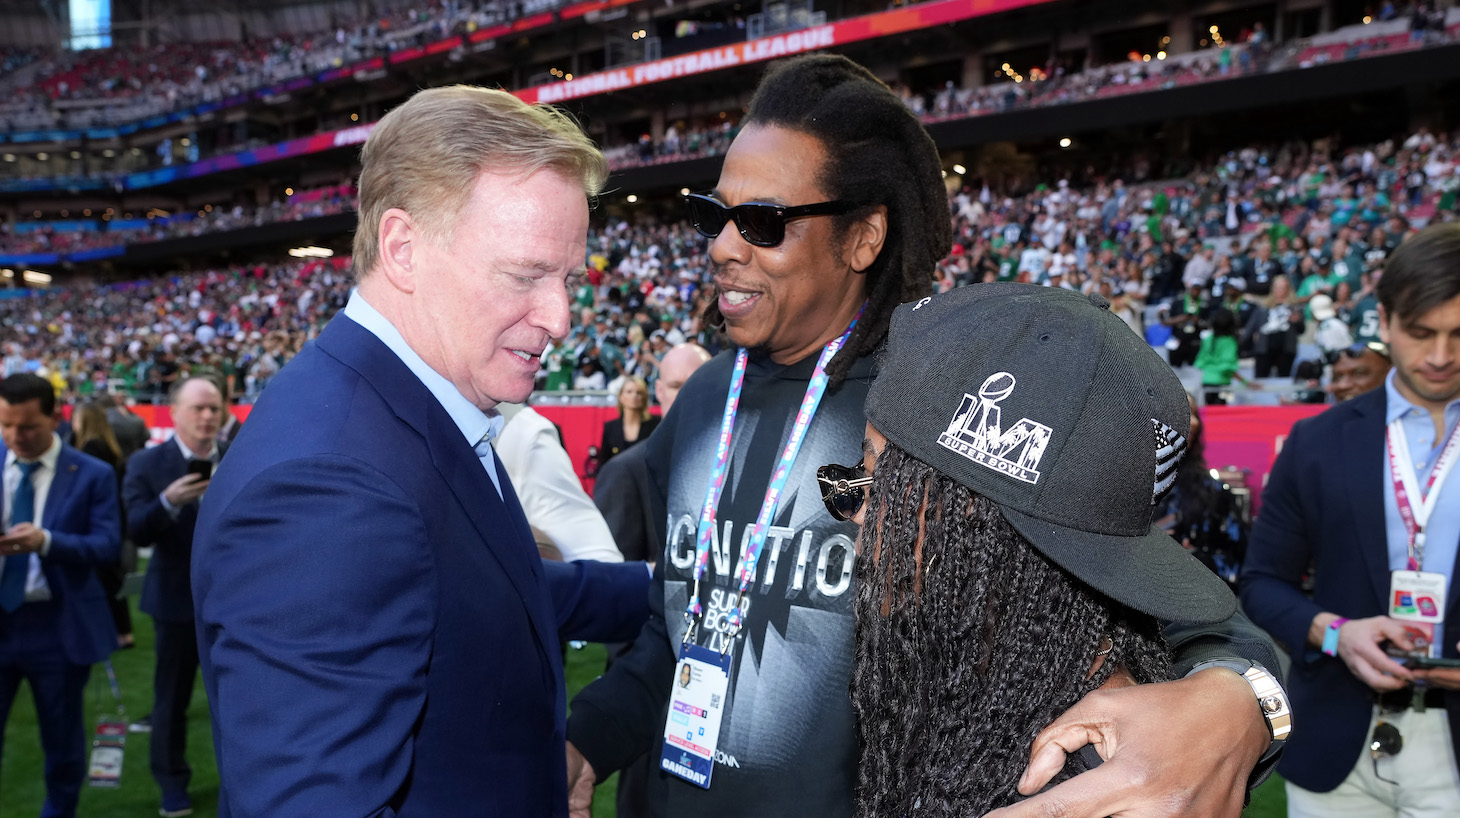 Roger Goodell, Jay-Z and Blue Ivy Carter attend Super Bowl LVII at State Farm Stadium on February 12, 2023 in Glendale, Arizona.